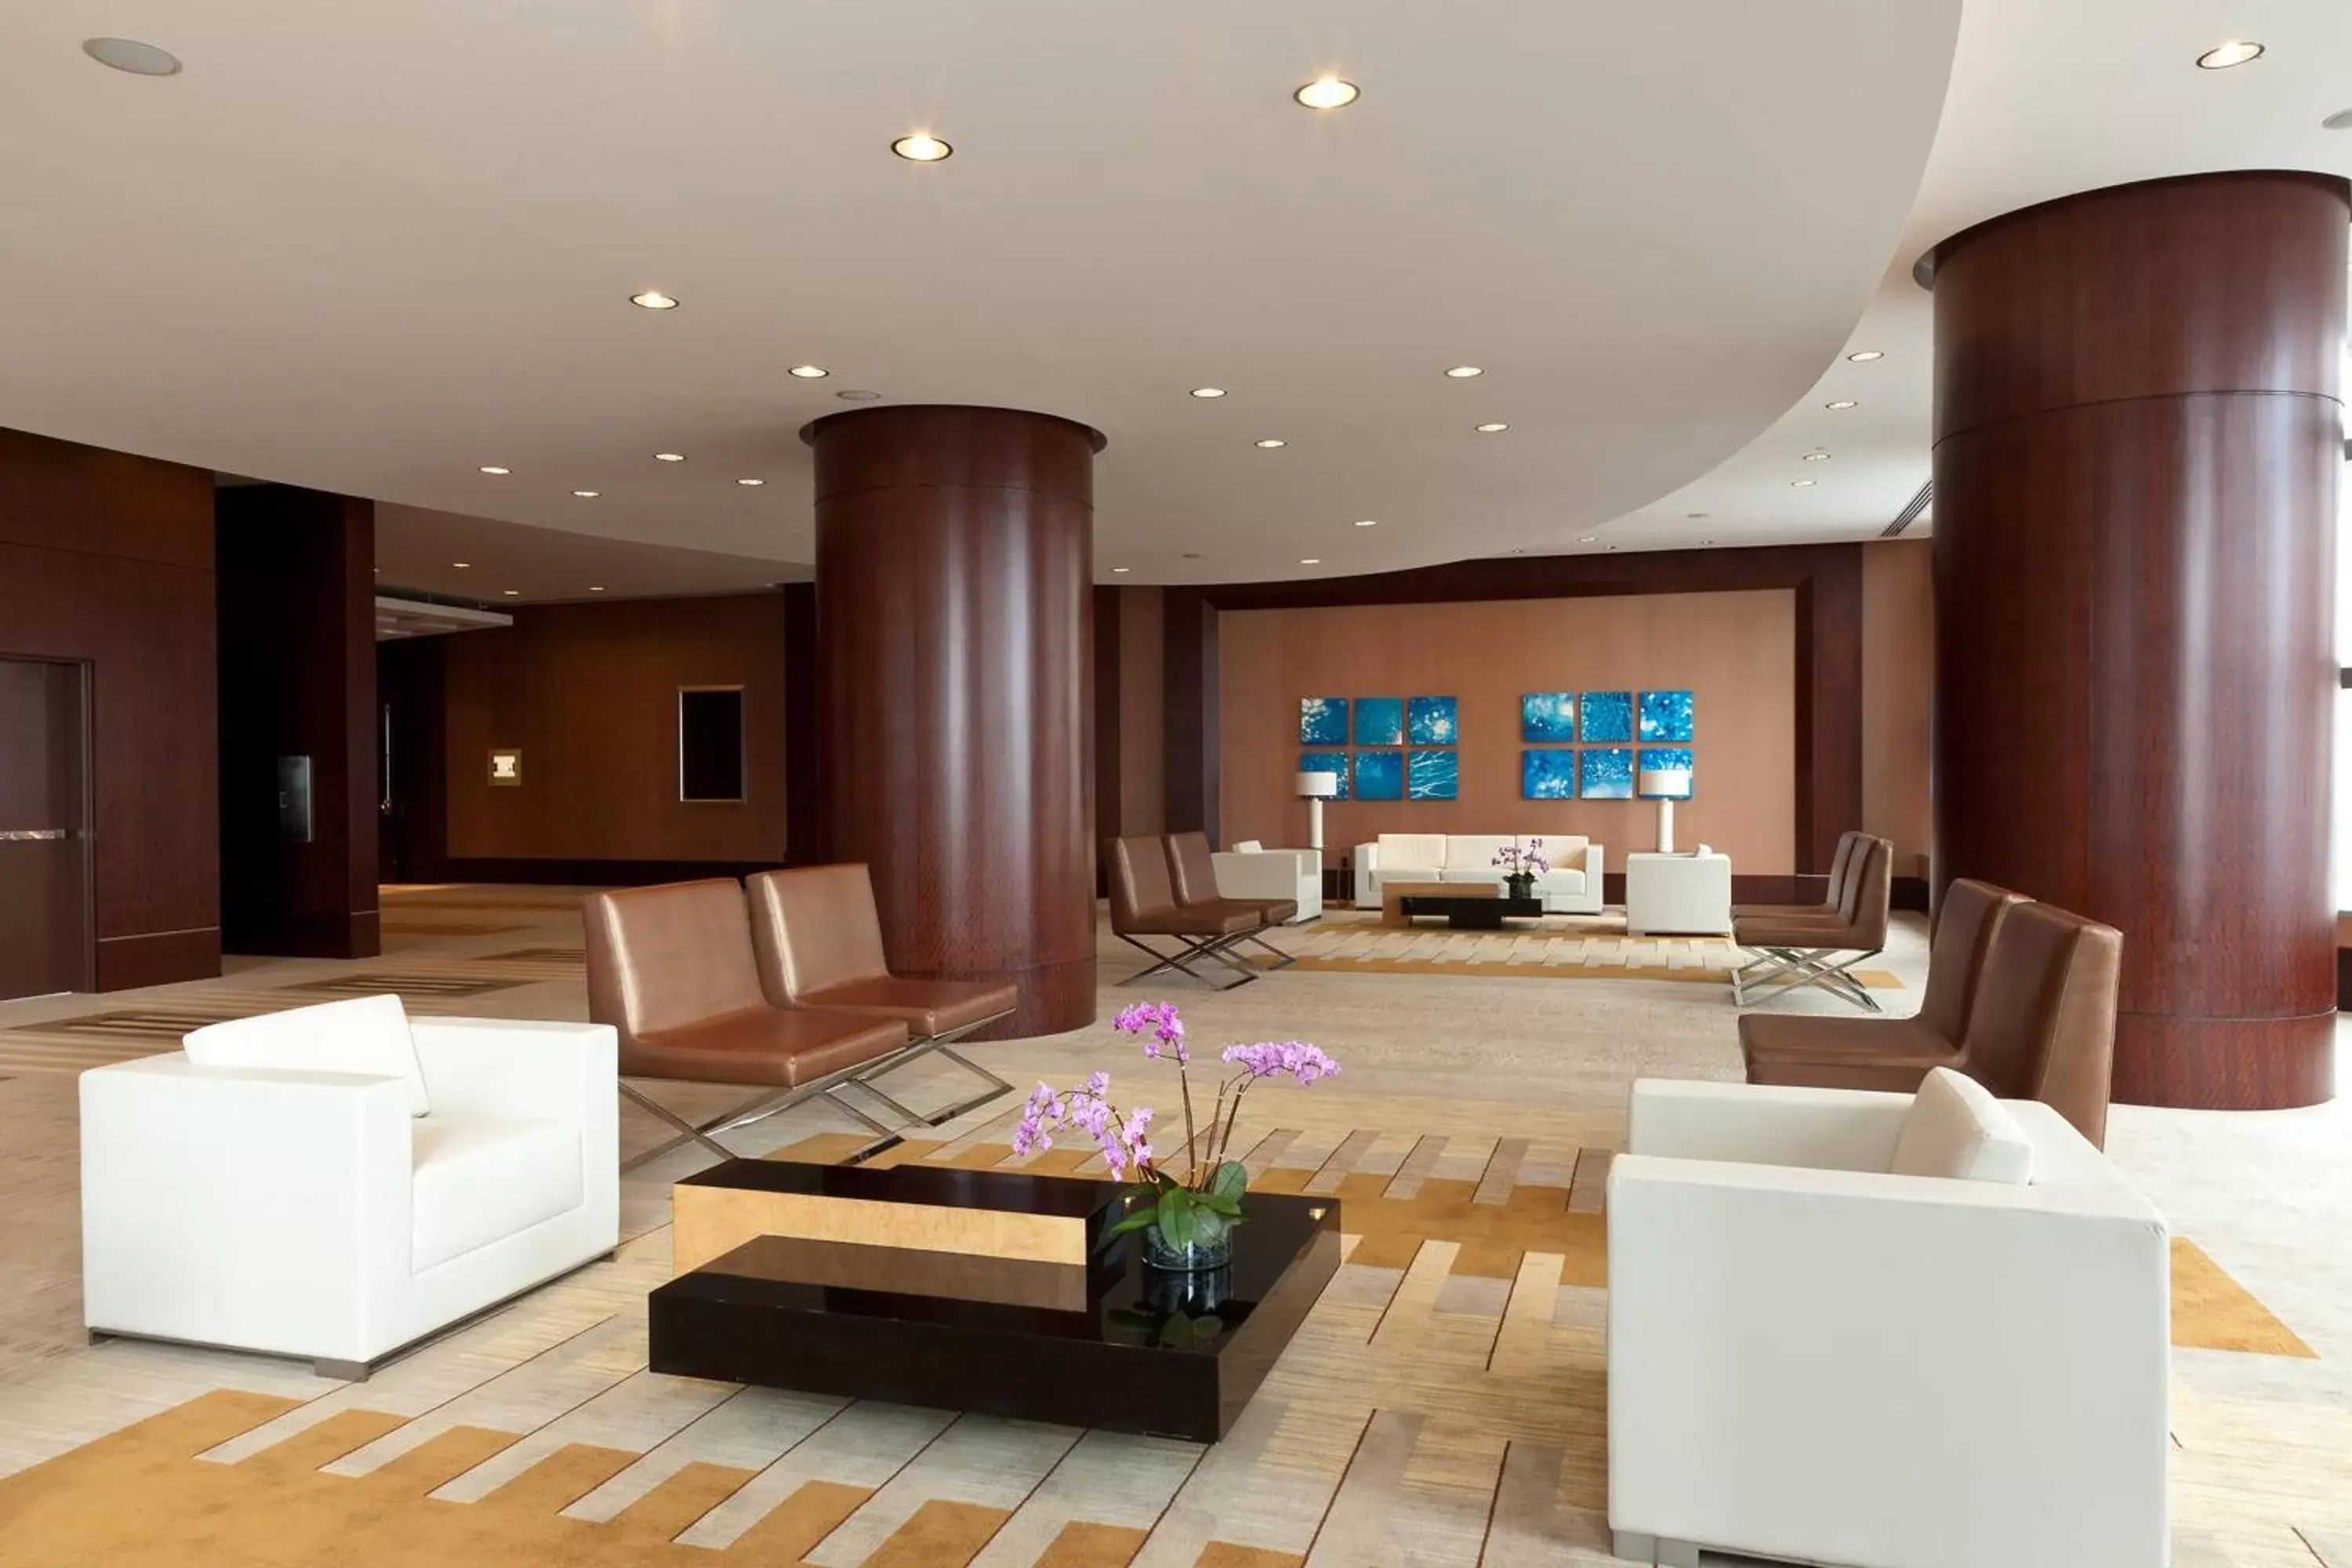 Meeting/conference room, Lobby/Reception in JW Marriott Marquis Miami